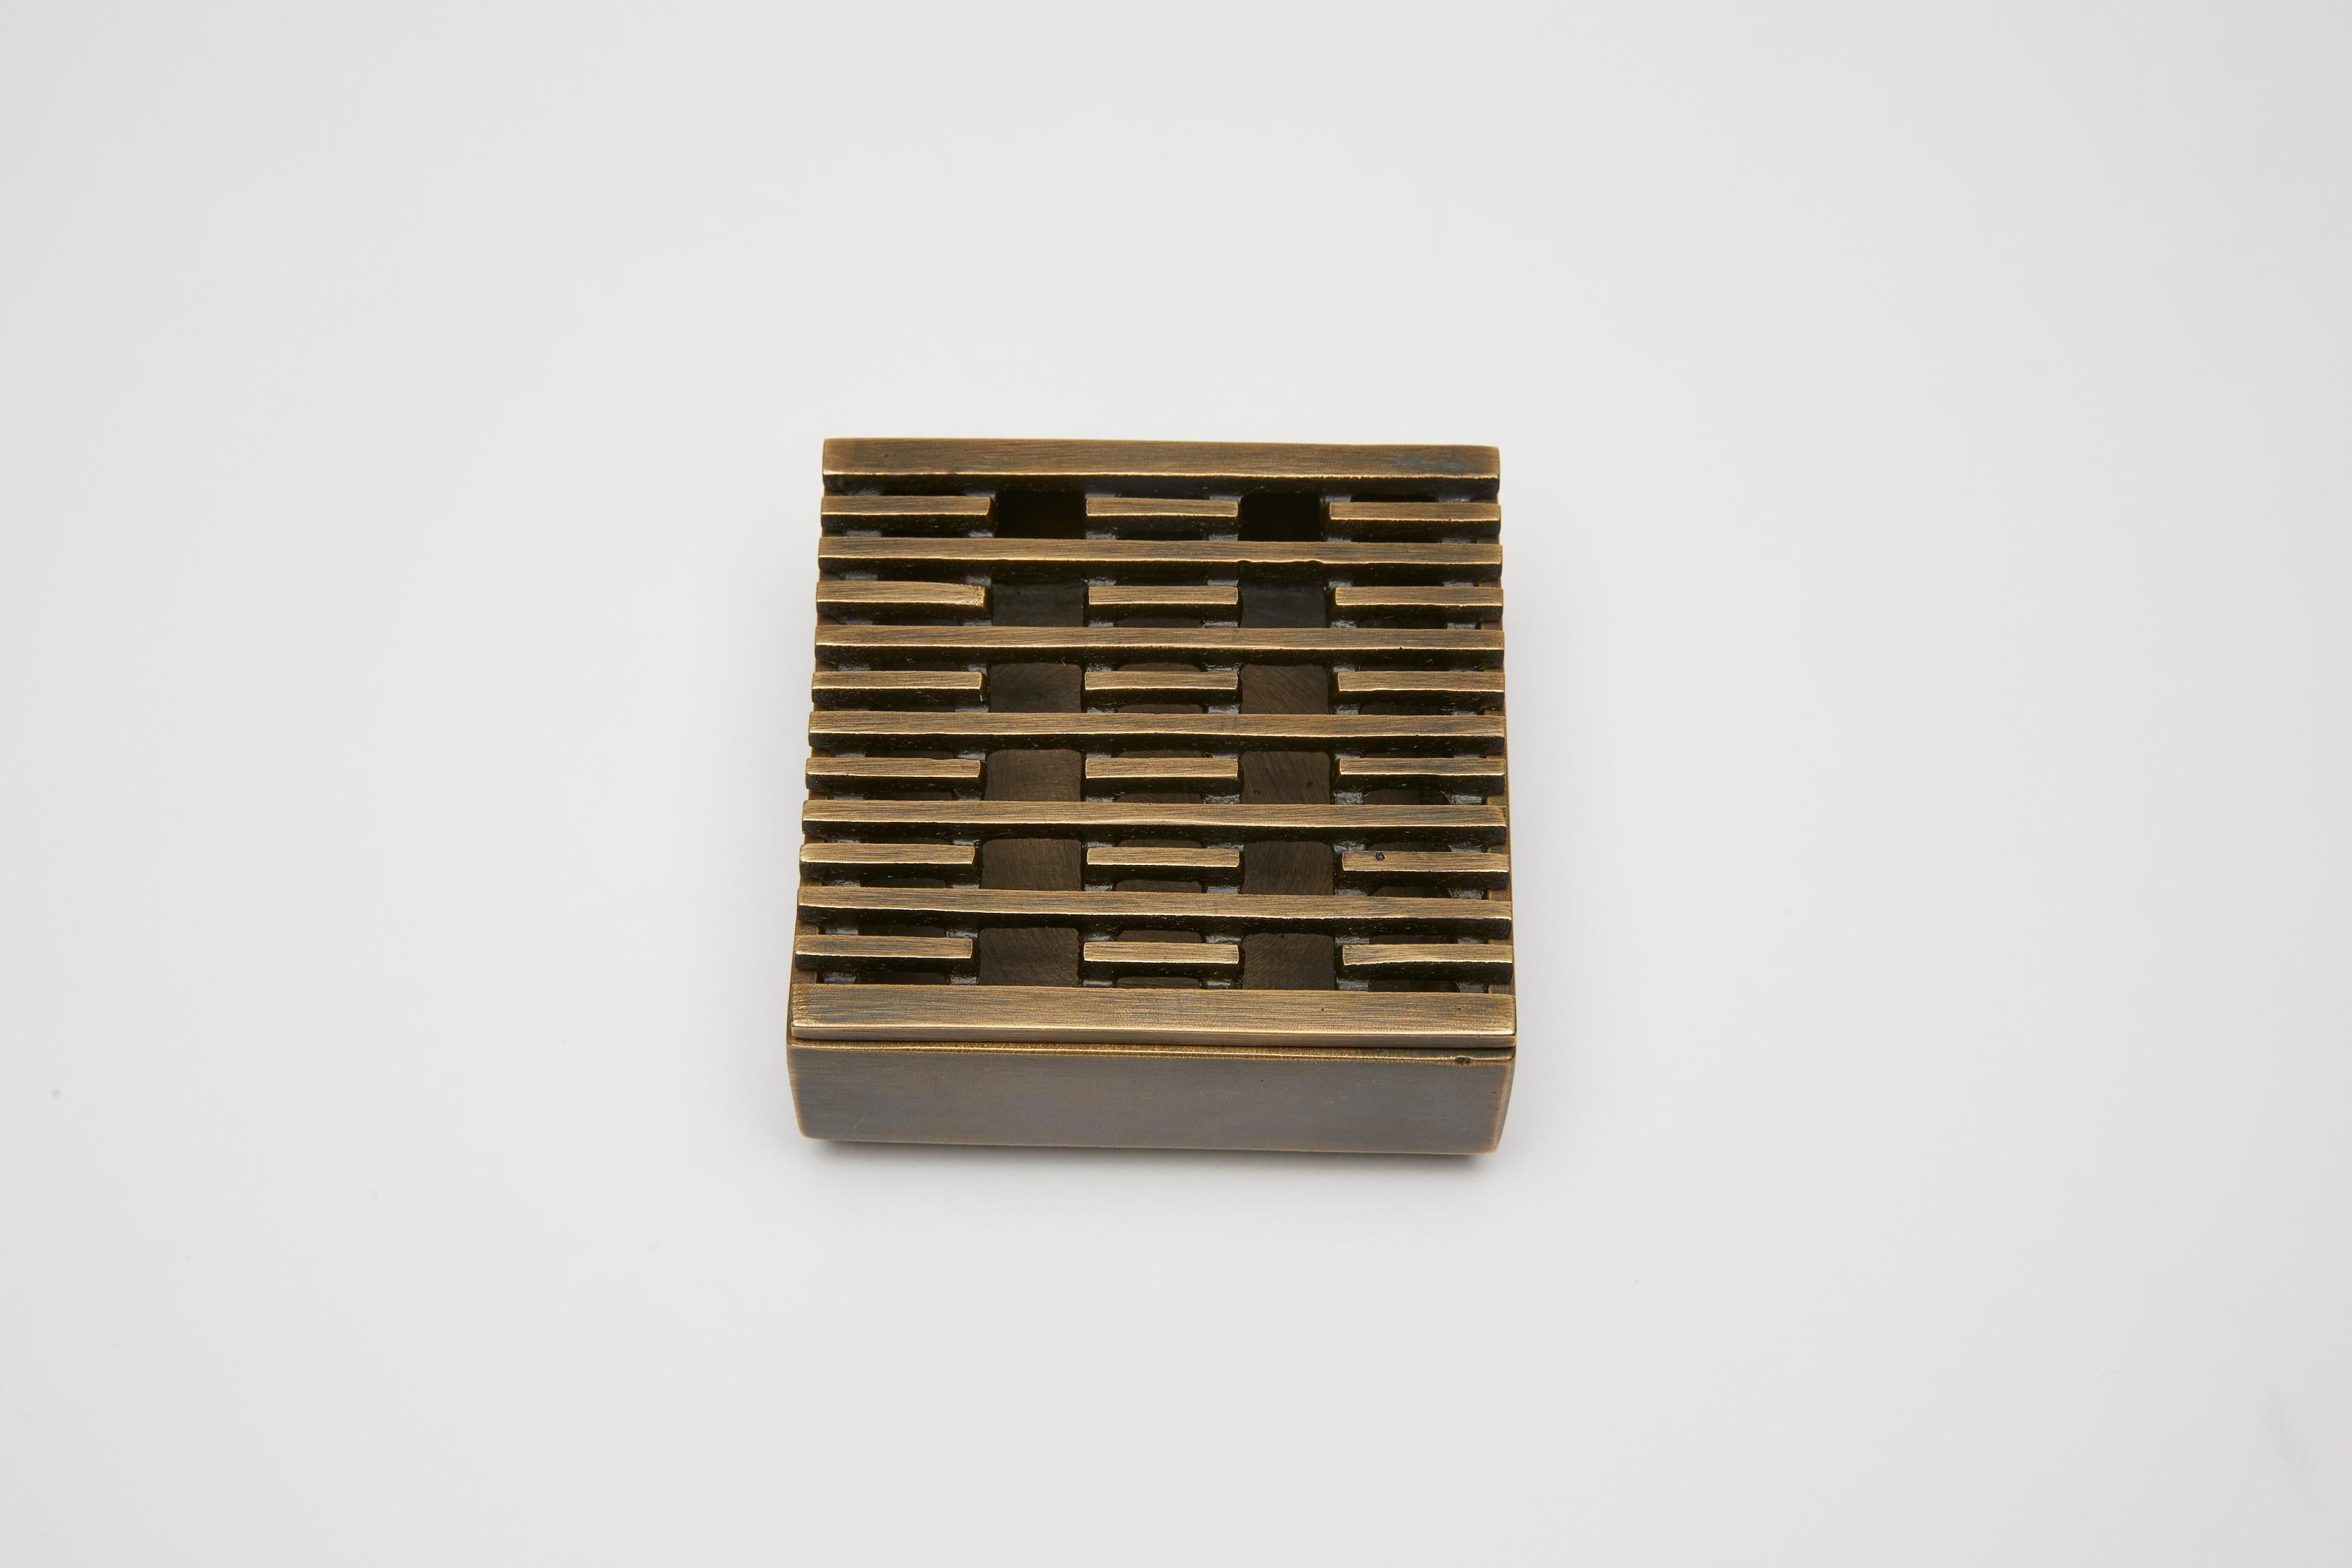 The bronze incense box or ashtray is designed with a patterned removable top. The motif used here, a repetition of lines and voids, has been developed by Reda Amalou and is used in several pieces of the Reda Amalou Collection.

The bronze box is 75